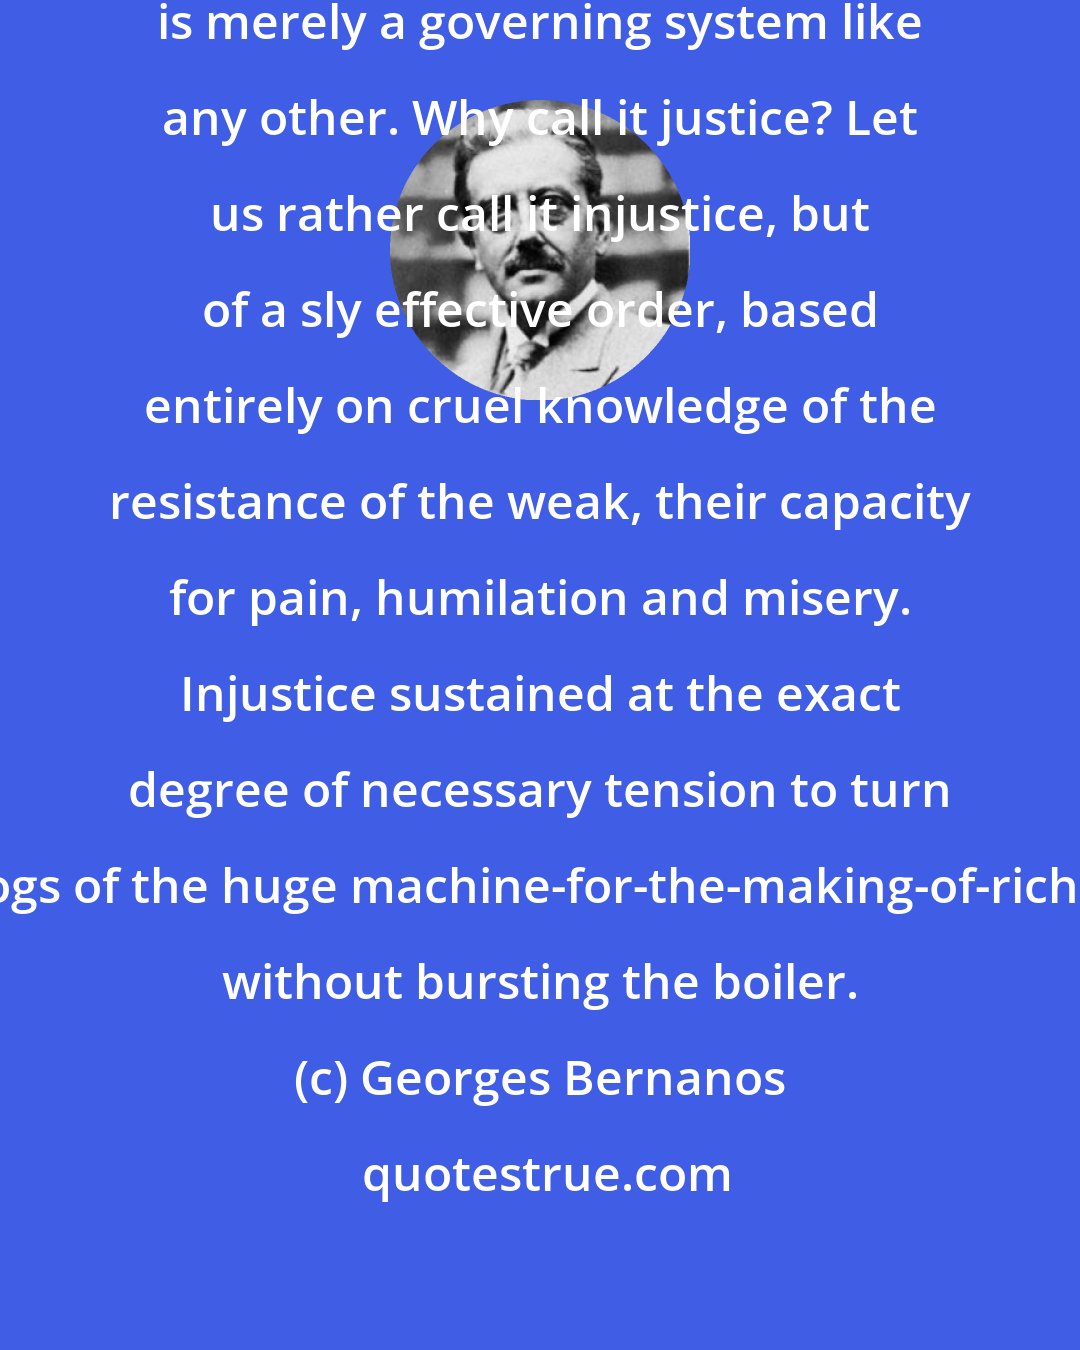 Georges Bernanos: Justice in the hands of the powerful is merely a governing system like any other. Why call it justice? Let us rather call it injustice, but of a sly effective order, based entirely on cruel knowledge of the resistance of the weak, their capacity for pain, humilation and misery. Injustice sustained at the exact degree of necessary tension to turn the cogs of the huge machine-for-the-making-of-rich-men, without bursting the boiler.